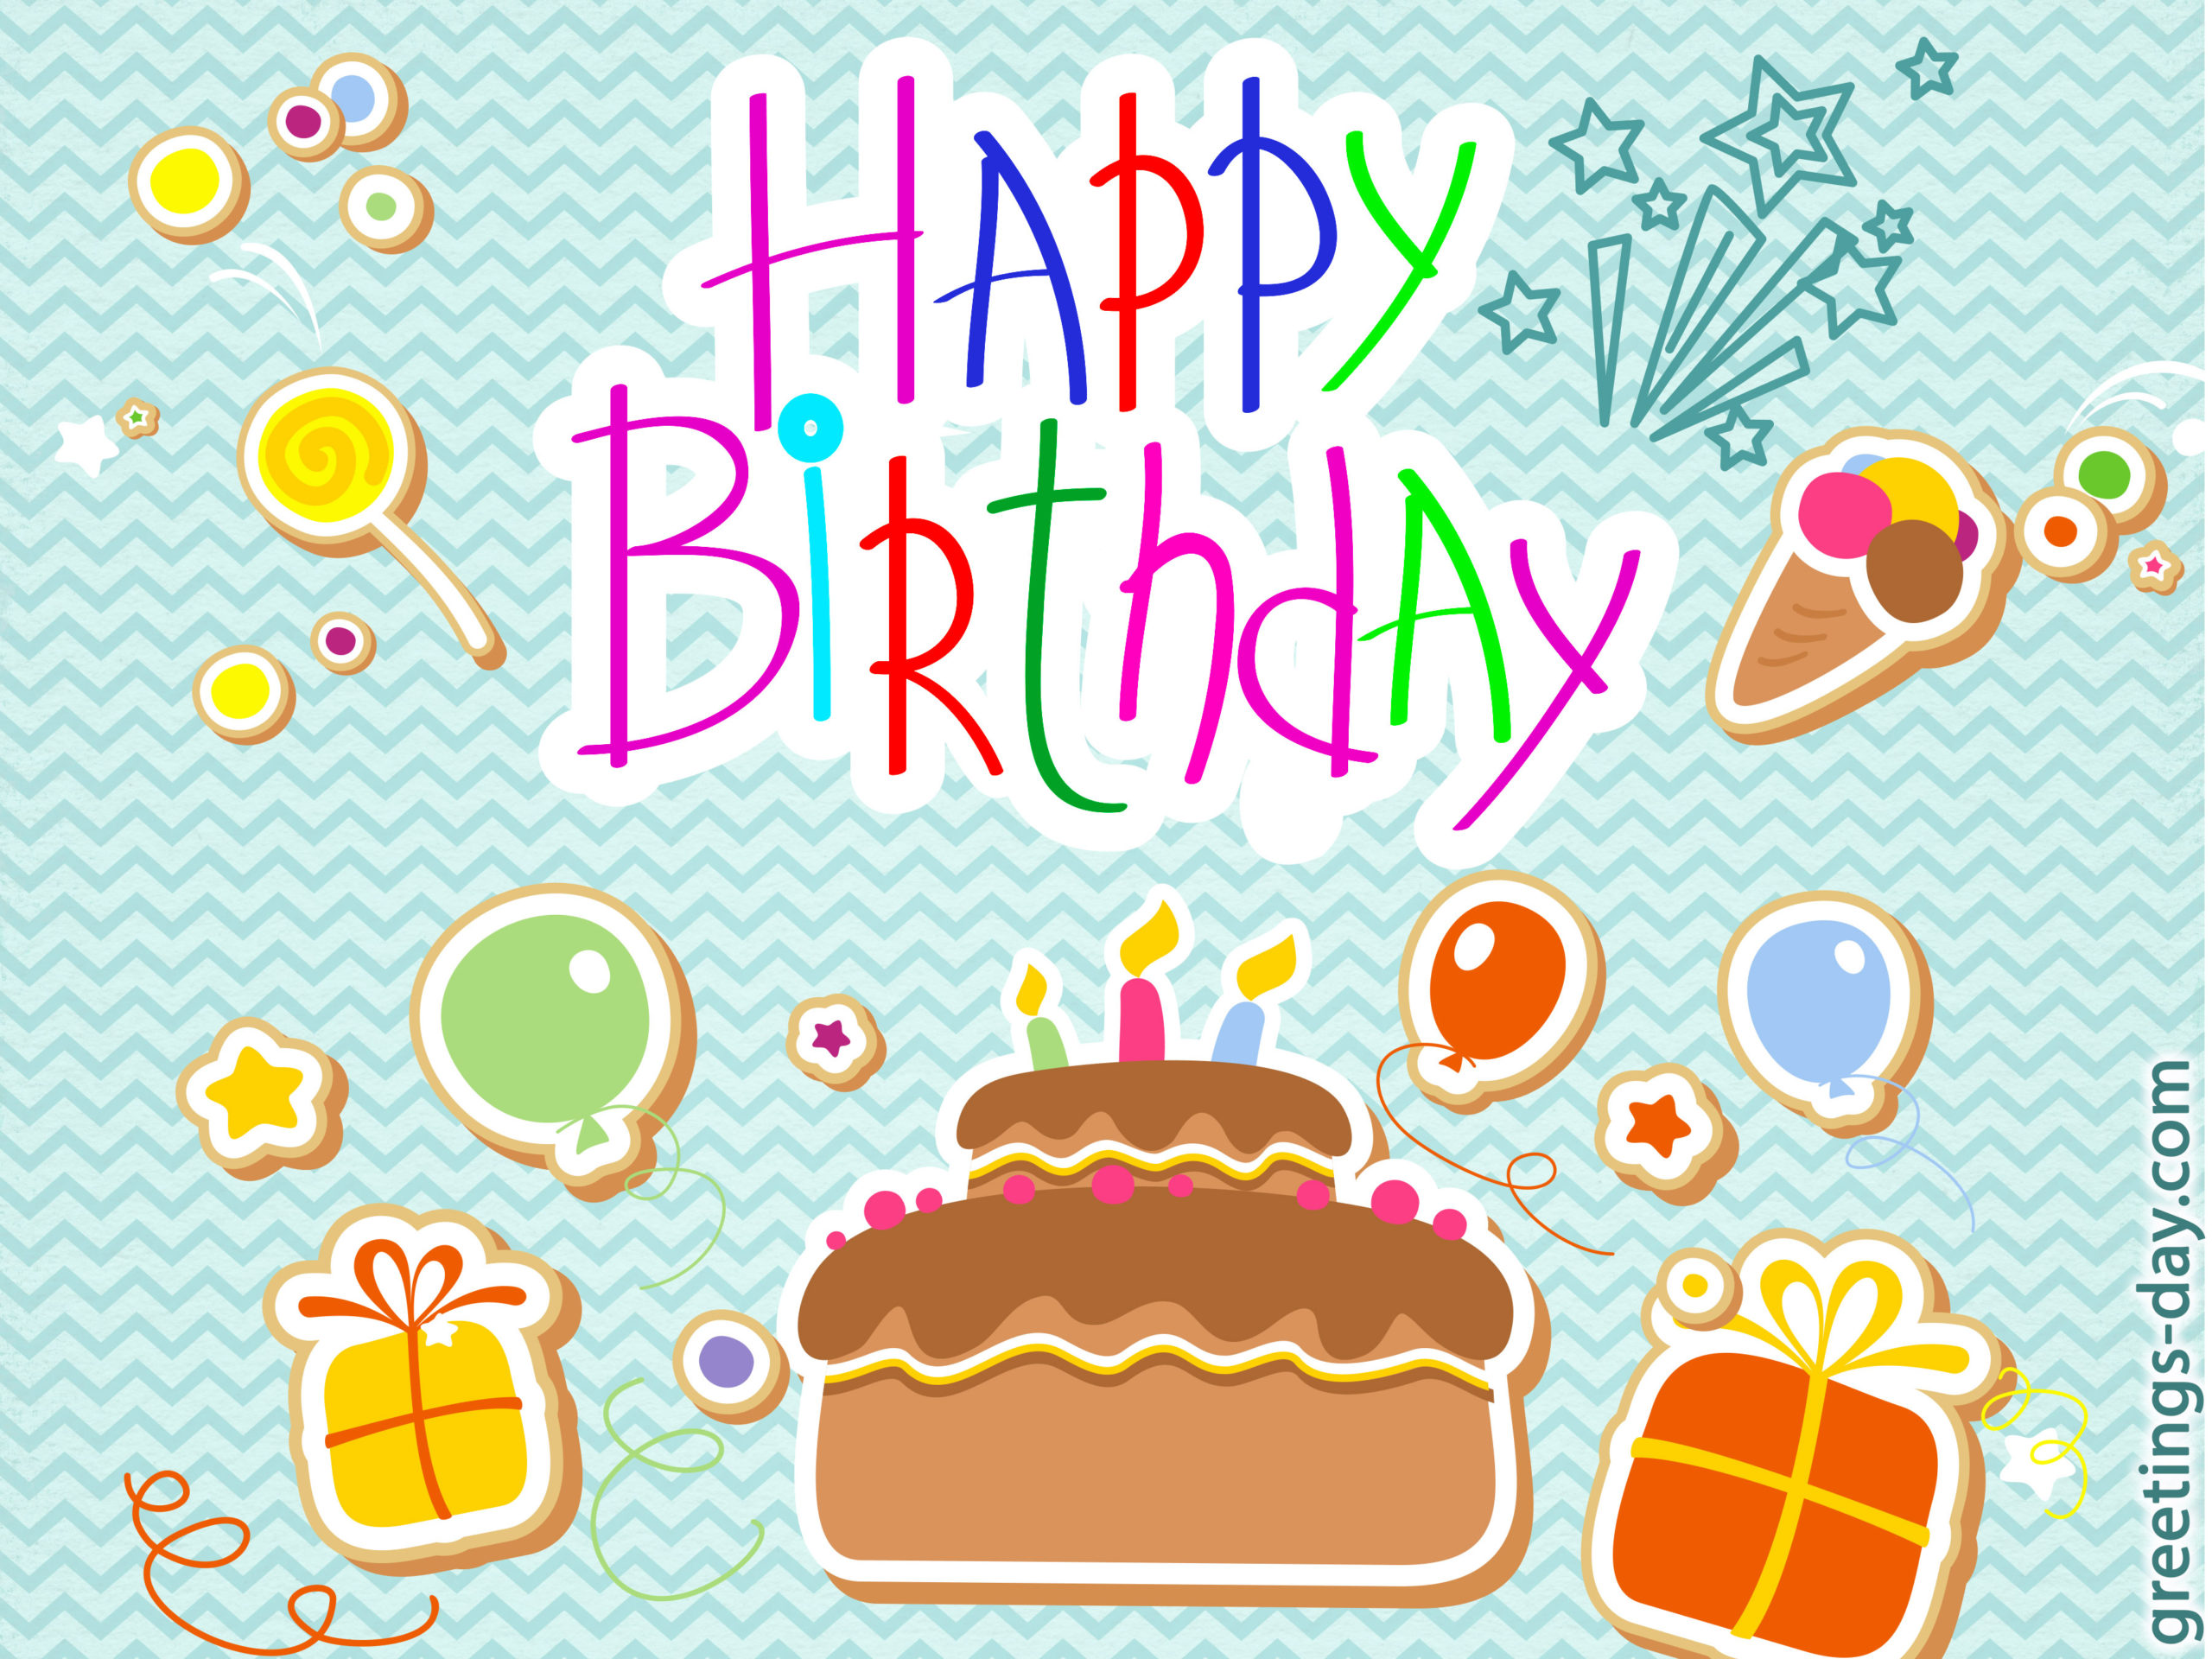 Happy Birthday Greeting Cards Share Image To You Friend On Birthday 